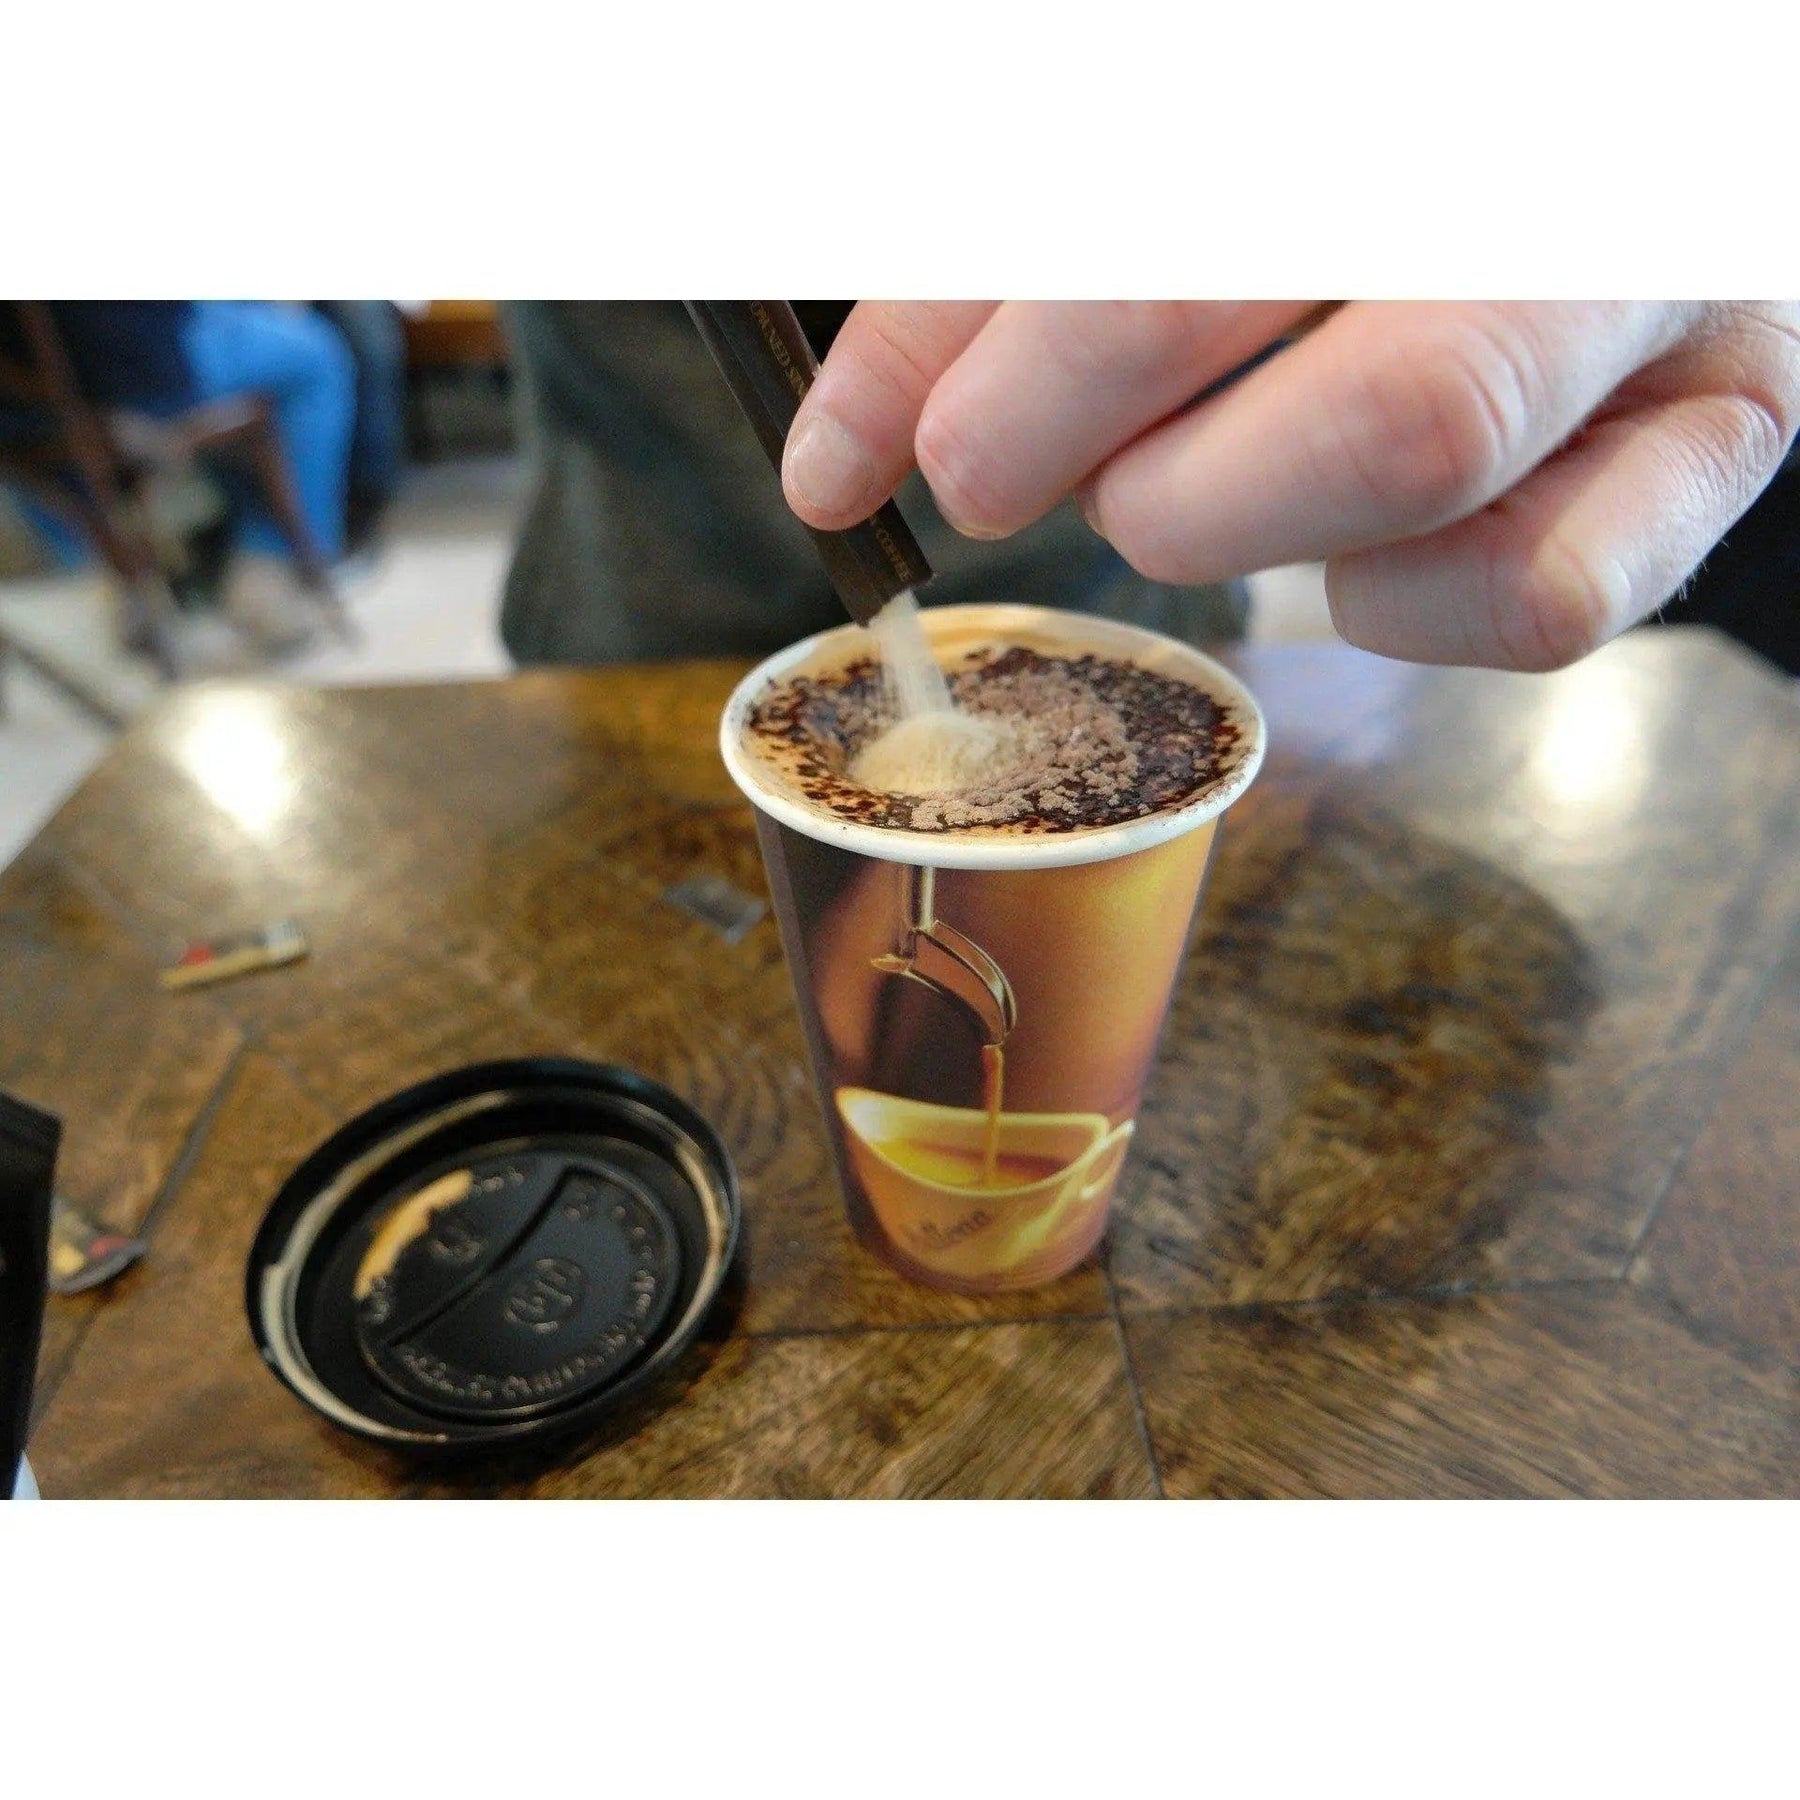 4 reasons why you should stop using disposable coffee cups. - Solenco South Africa